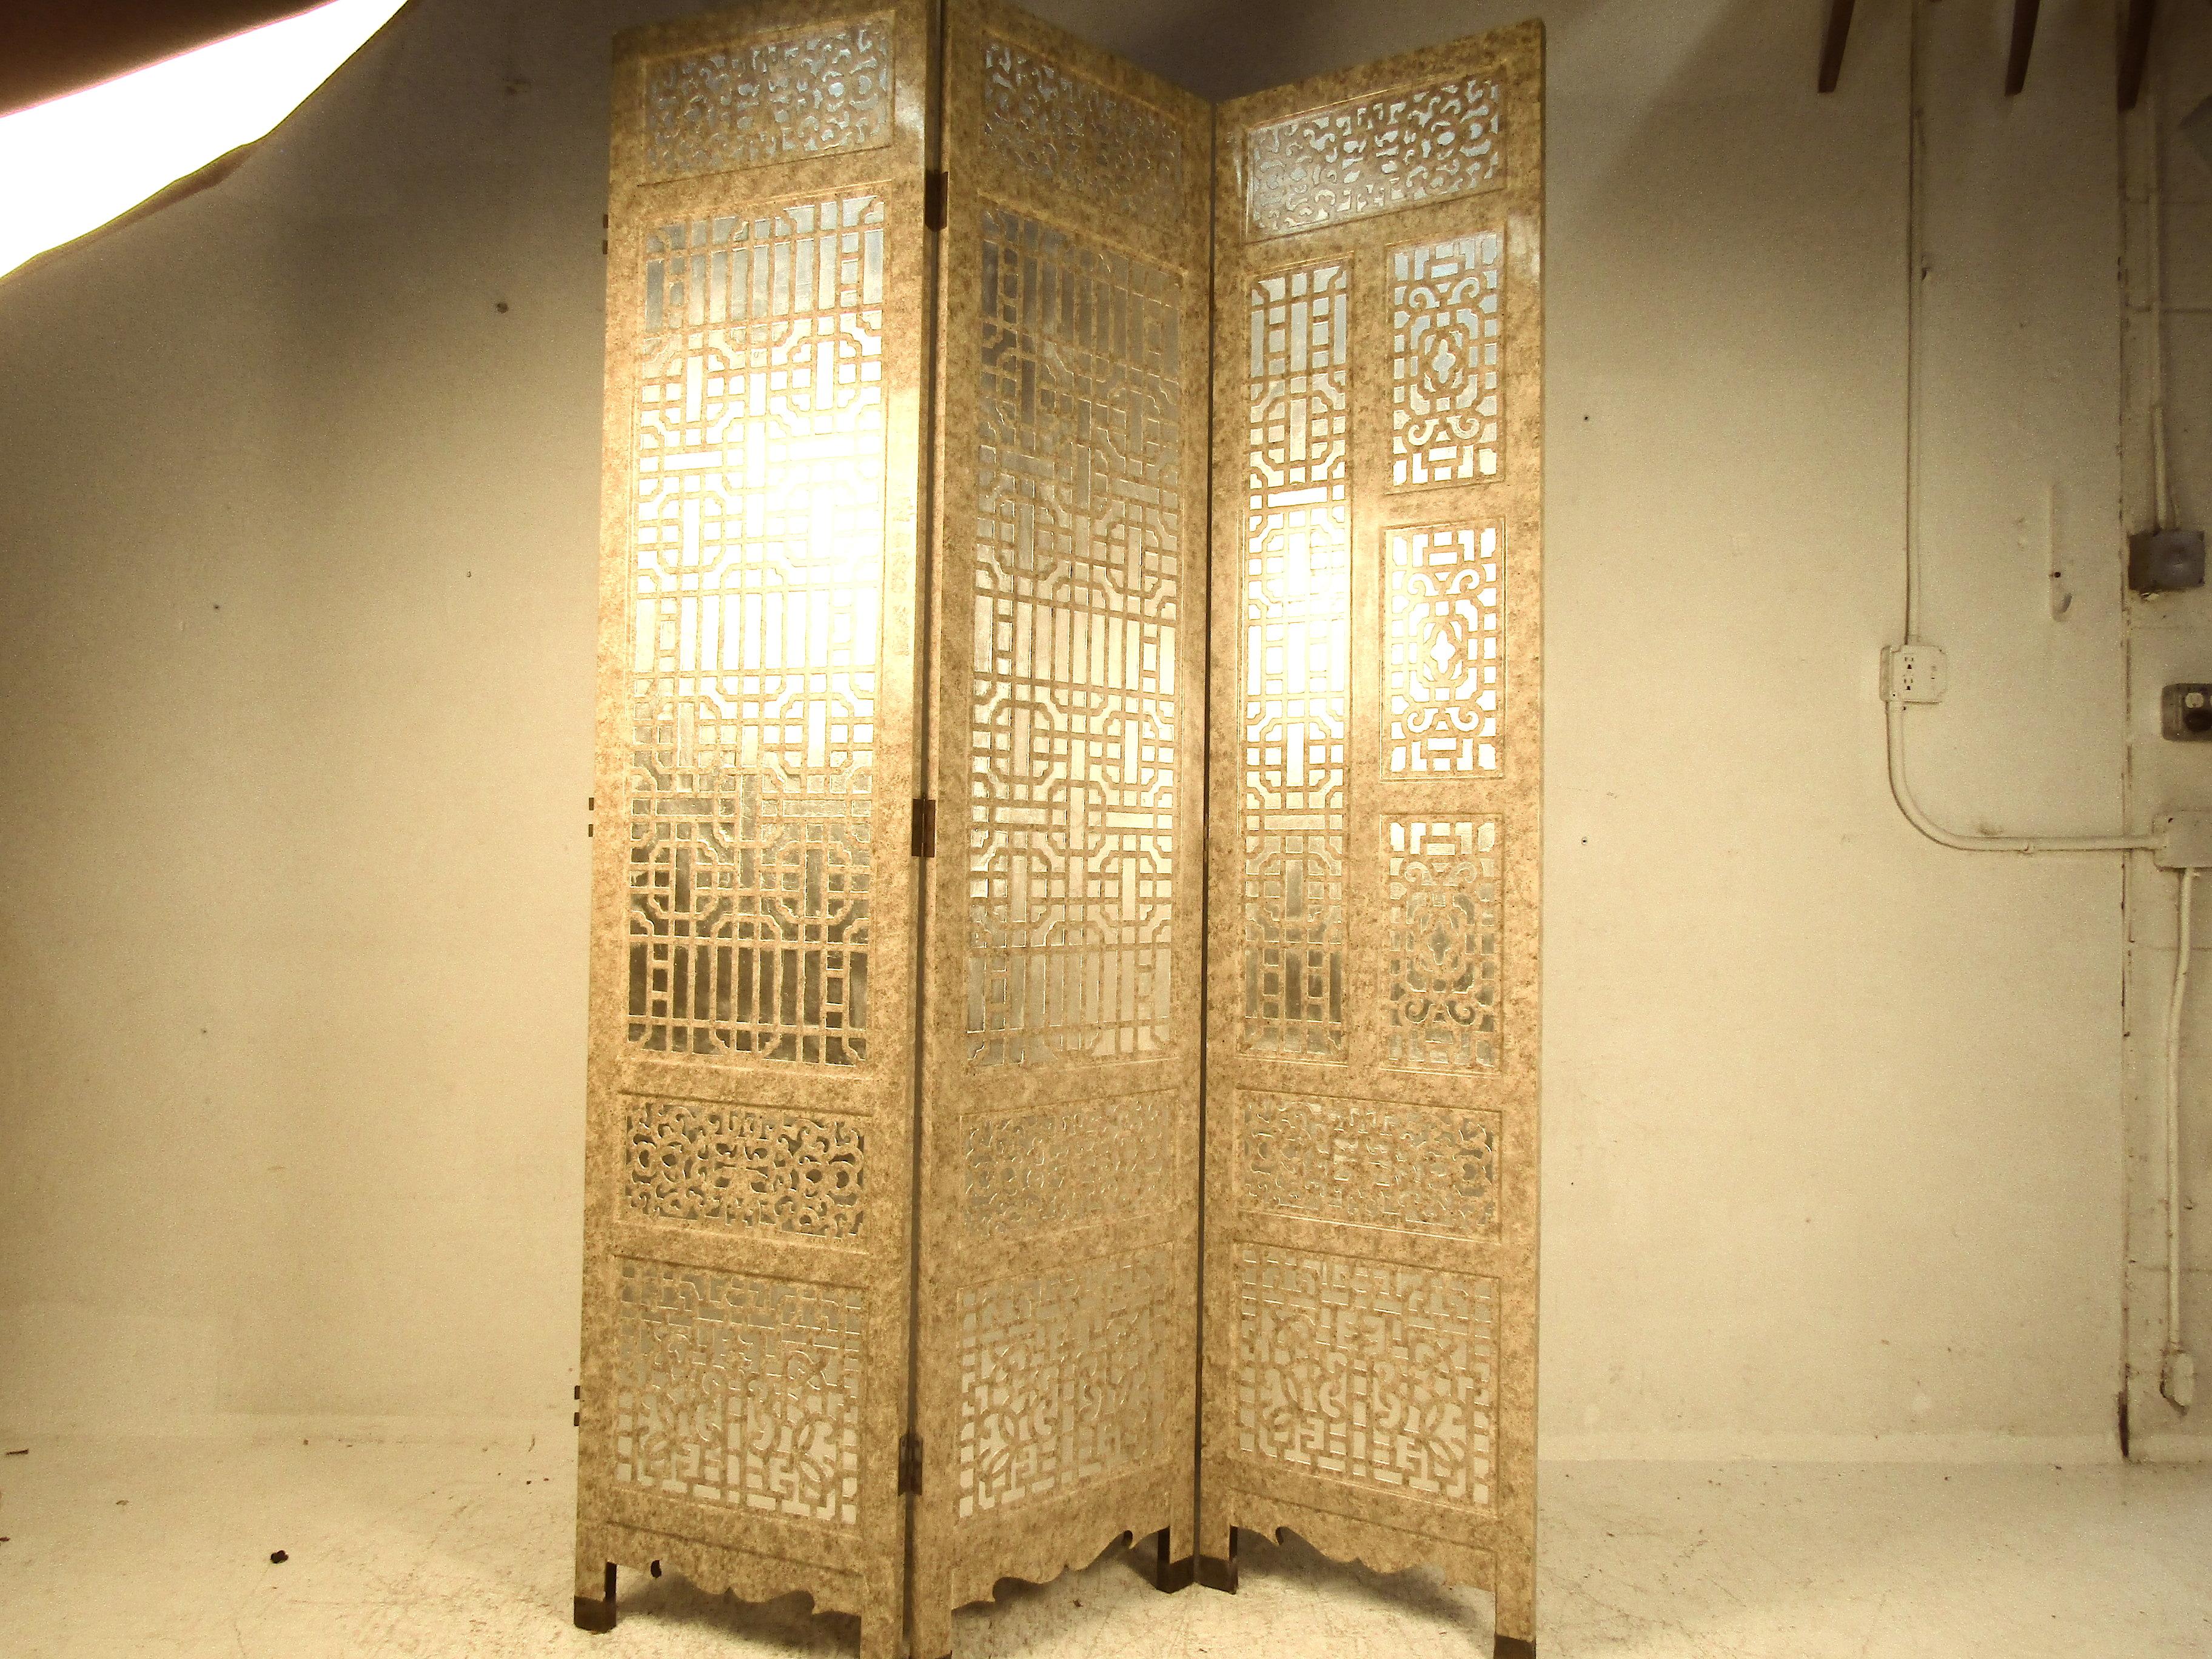 This very large ornate room divider will make a statement any place you put. Featuring a reflective finish, it catches the light and creates an element of fantasy. Perfect for creating additional space in a larger room, or blocking something from